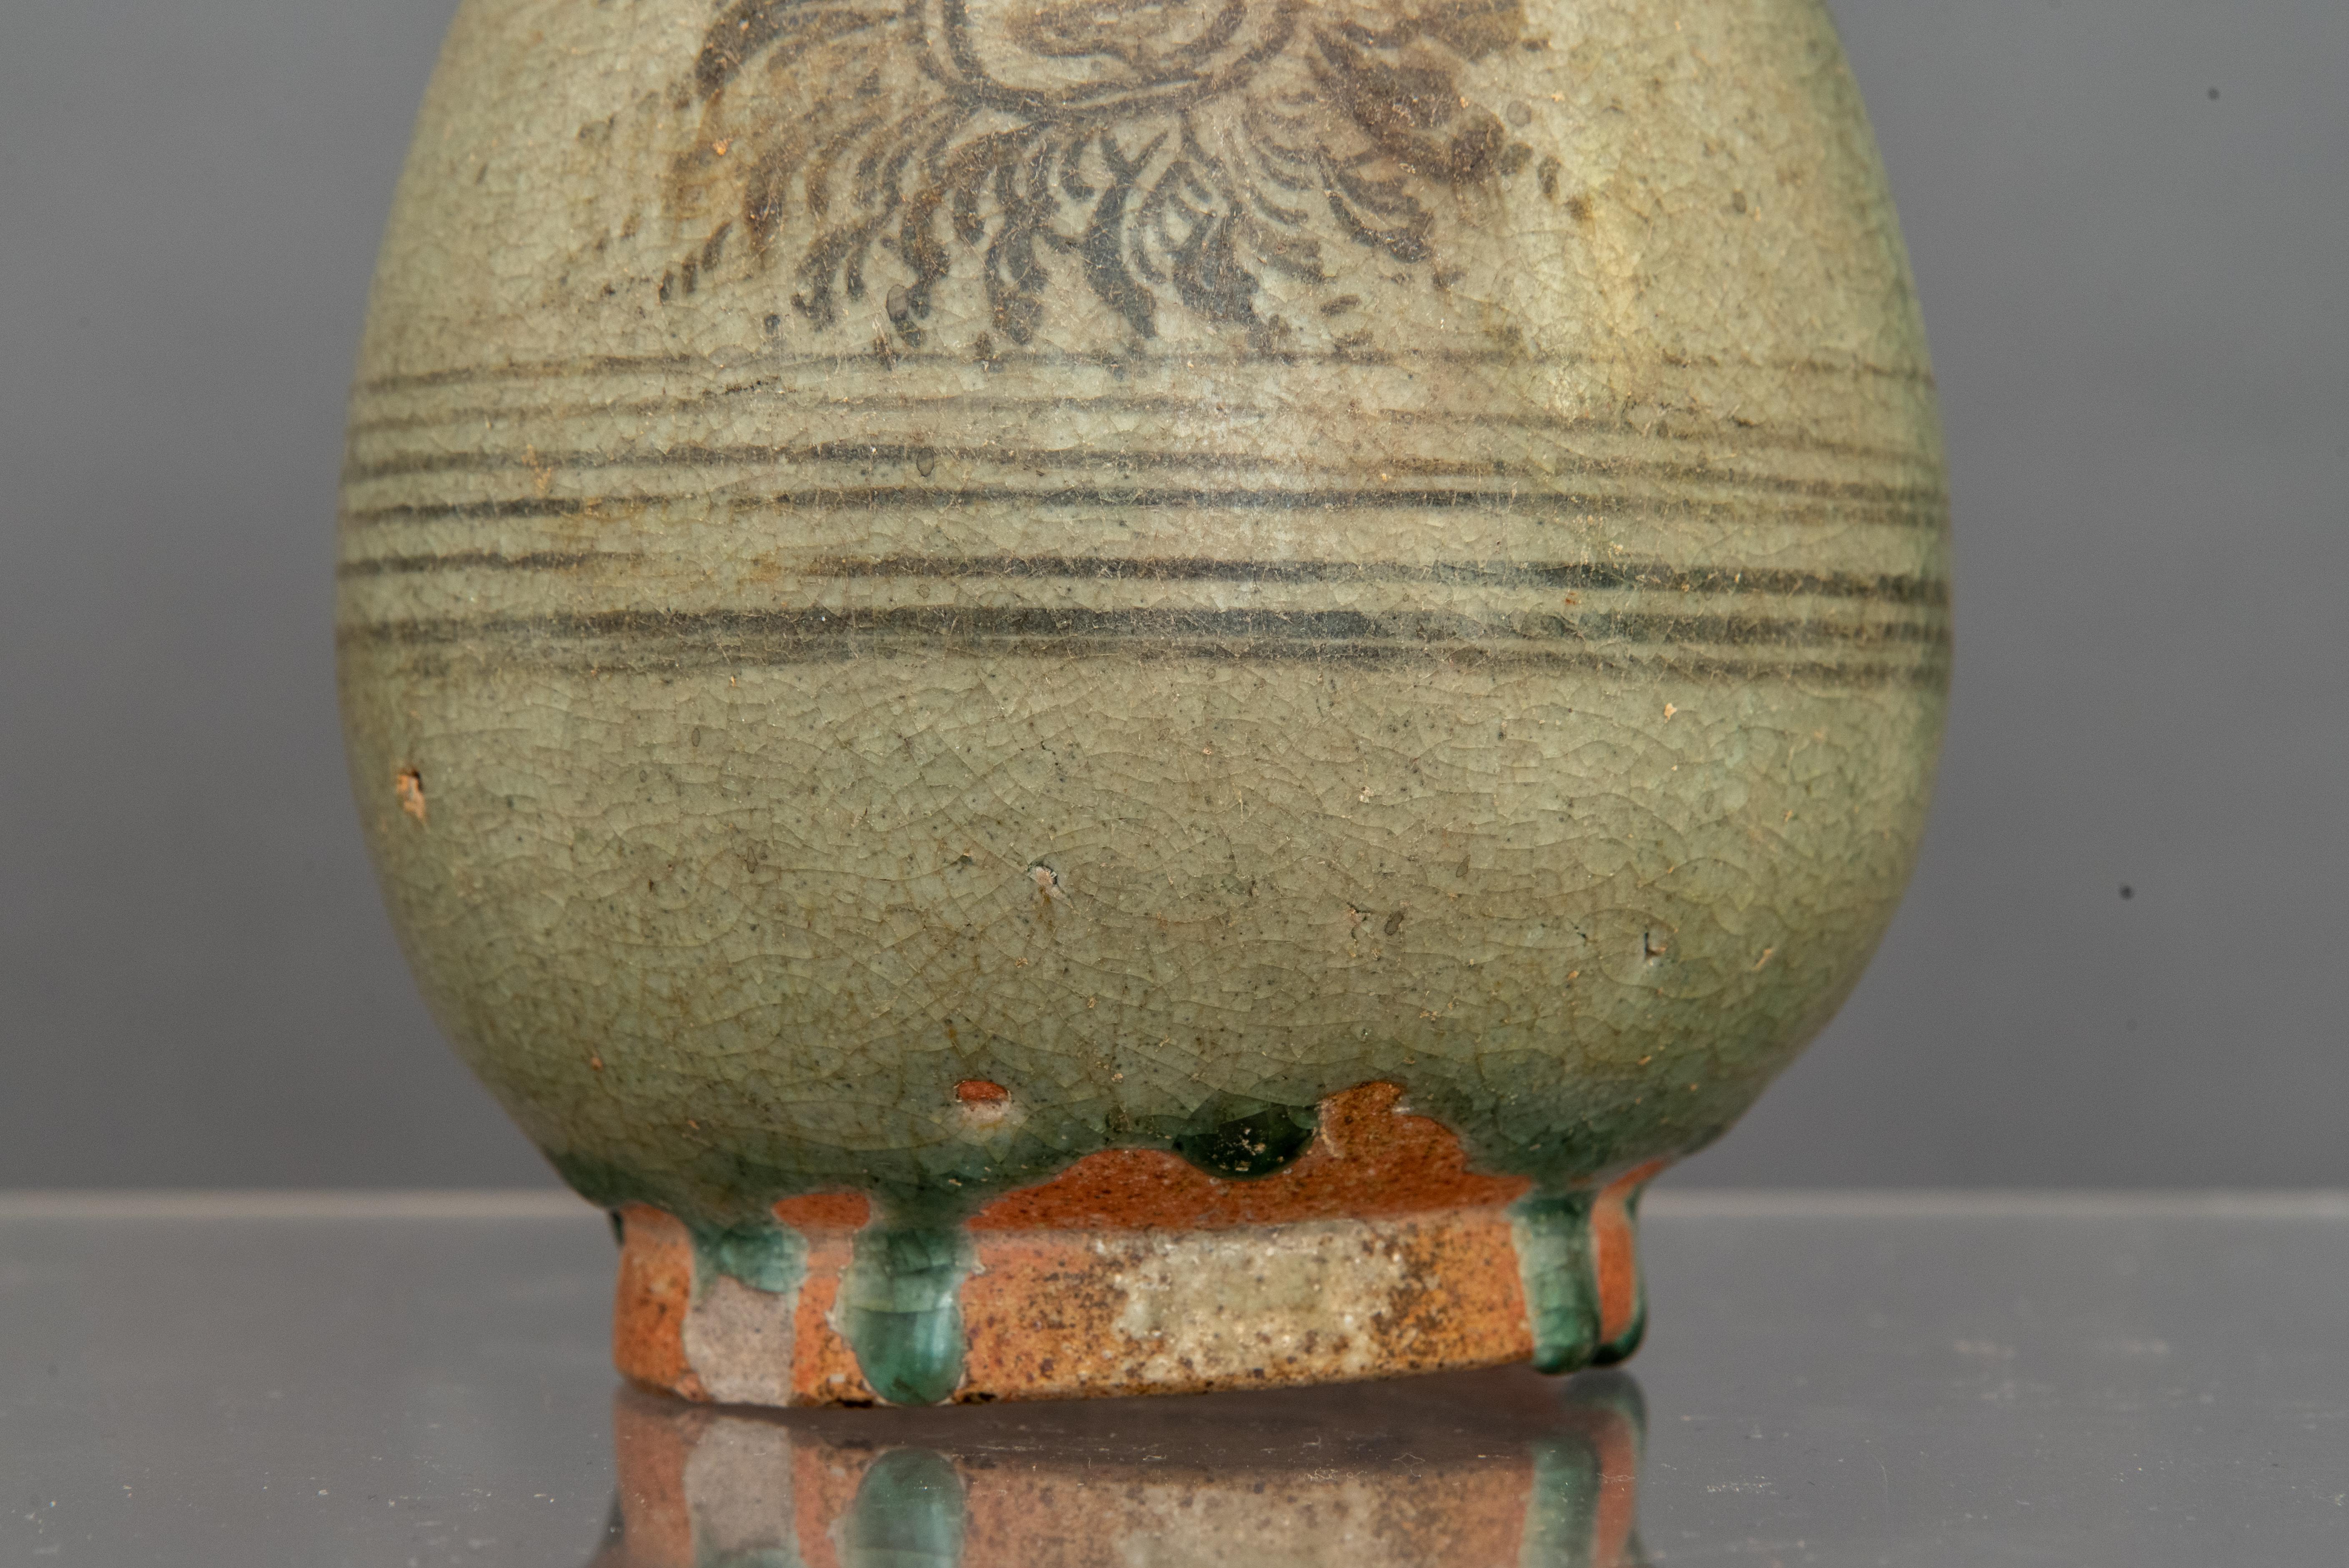 This is from Thailand and it is fifteenth century. Everything about it says so. The stoneware is terracotta colored  and there is a pontil mark on the bottom. Pontils were cylinders of dark clay used to hold pieces up off the floor in Thai kilns and